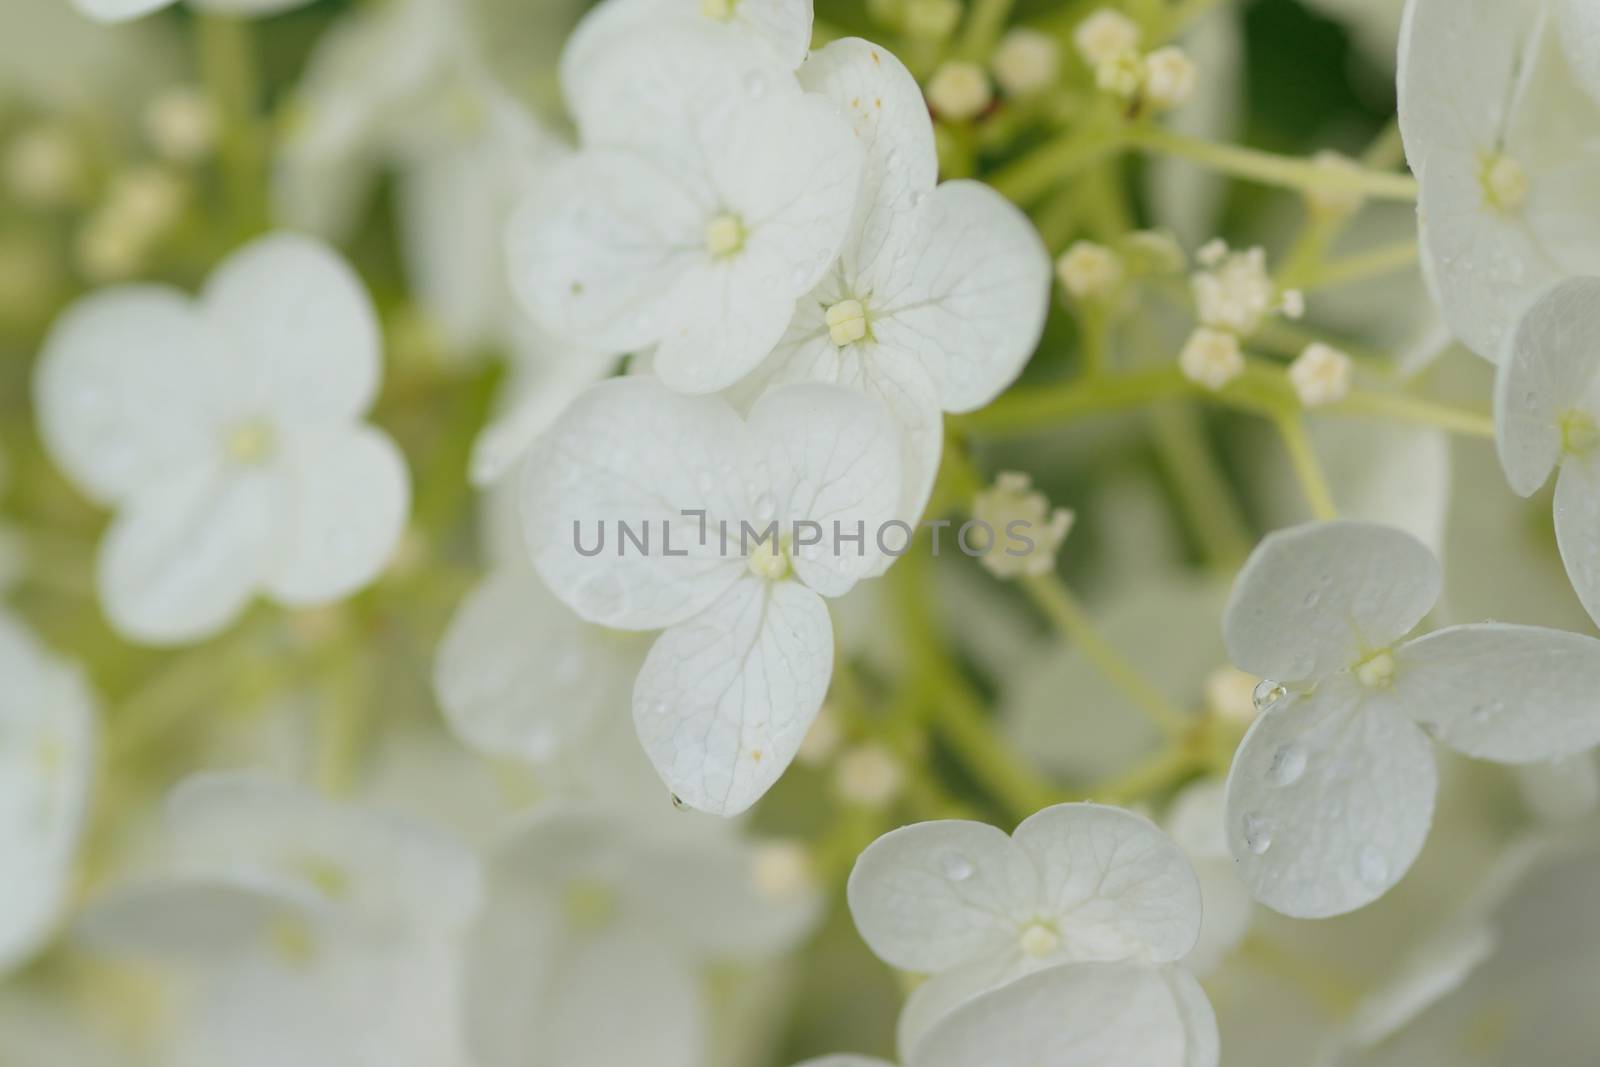 Macro texture of white colored Hydrangea flowers with water droplets in horizontal frame